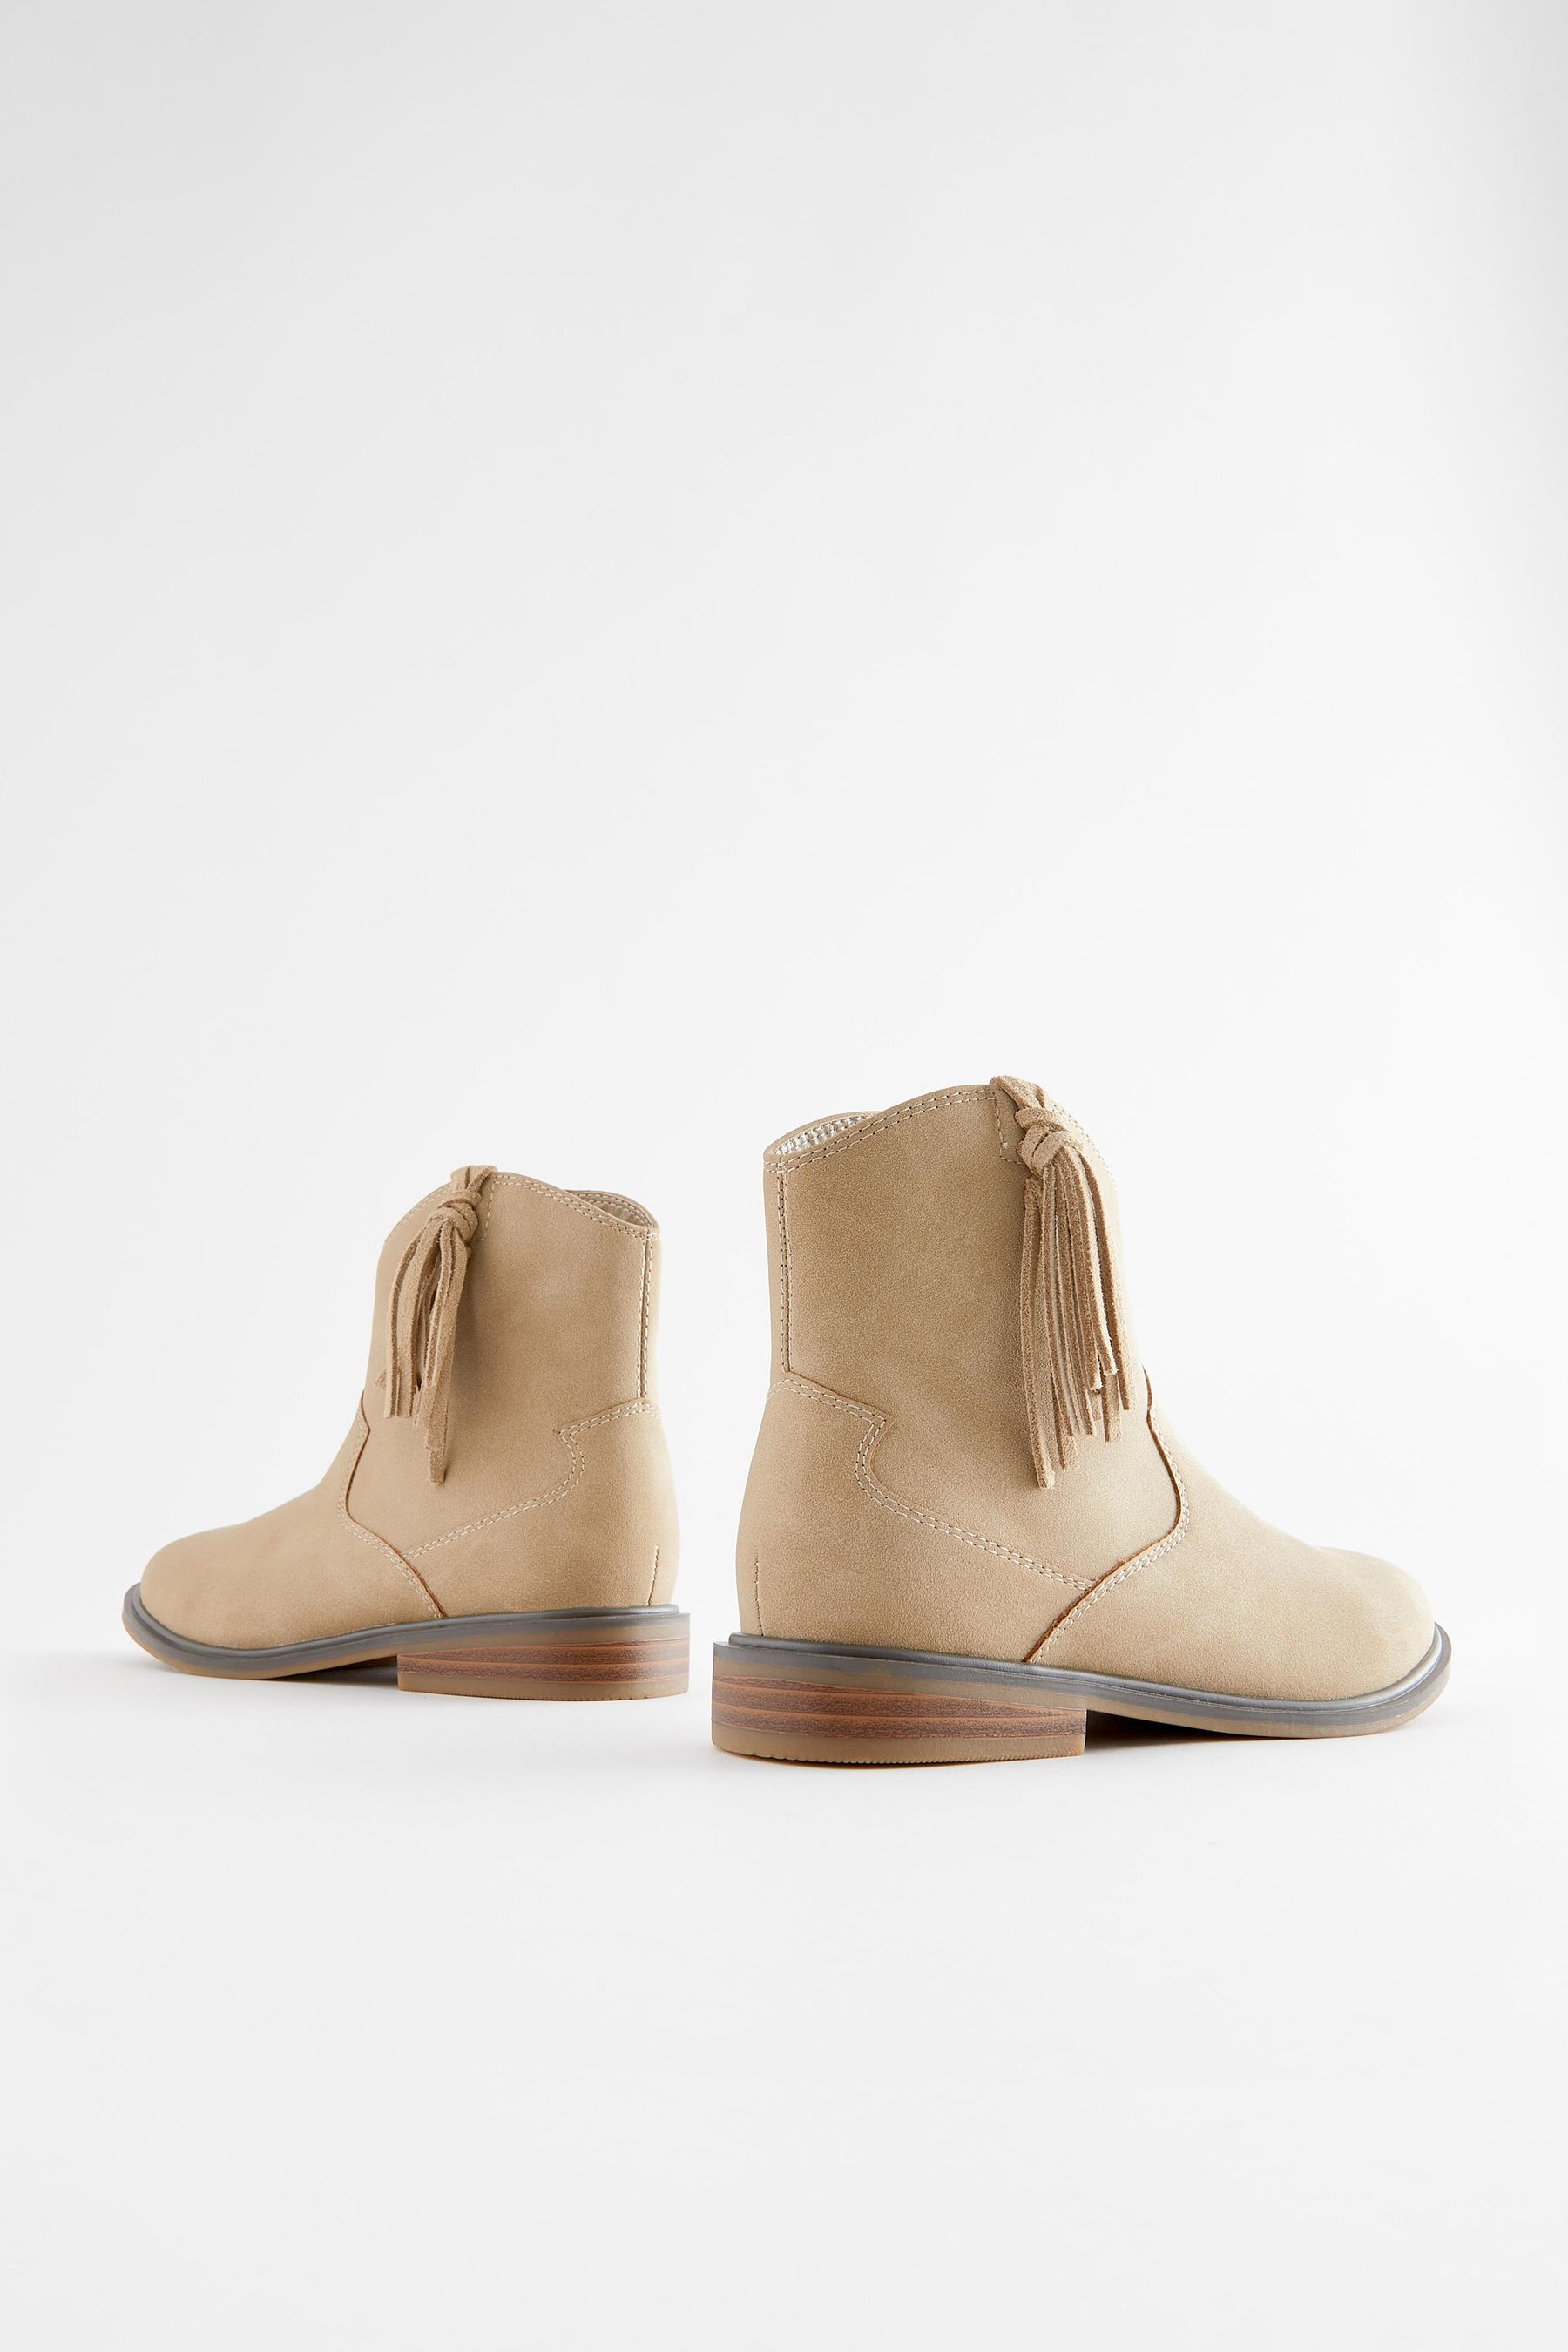 Buy Neutral Western Tassel Boots from the Next UK online shop